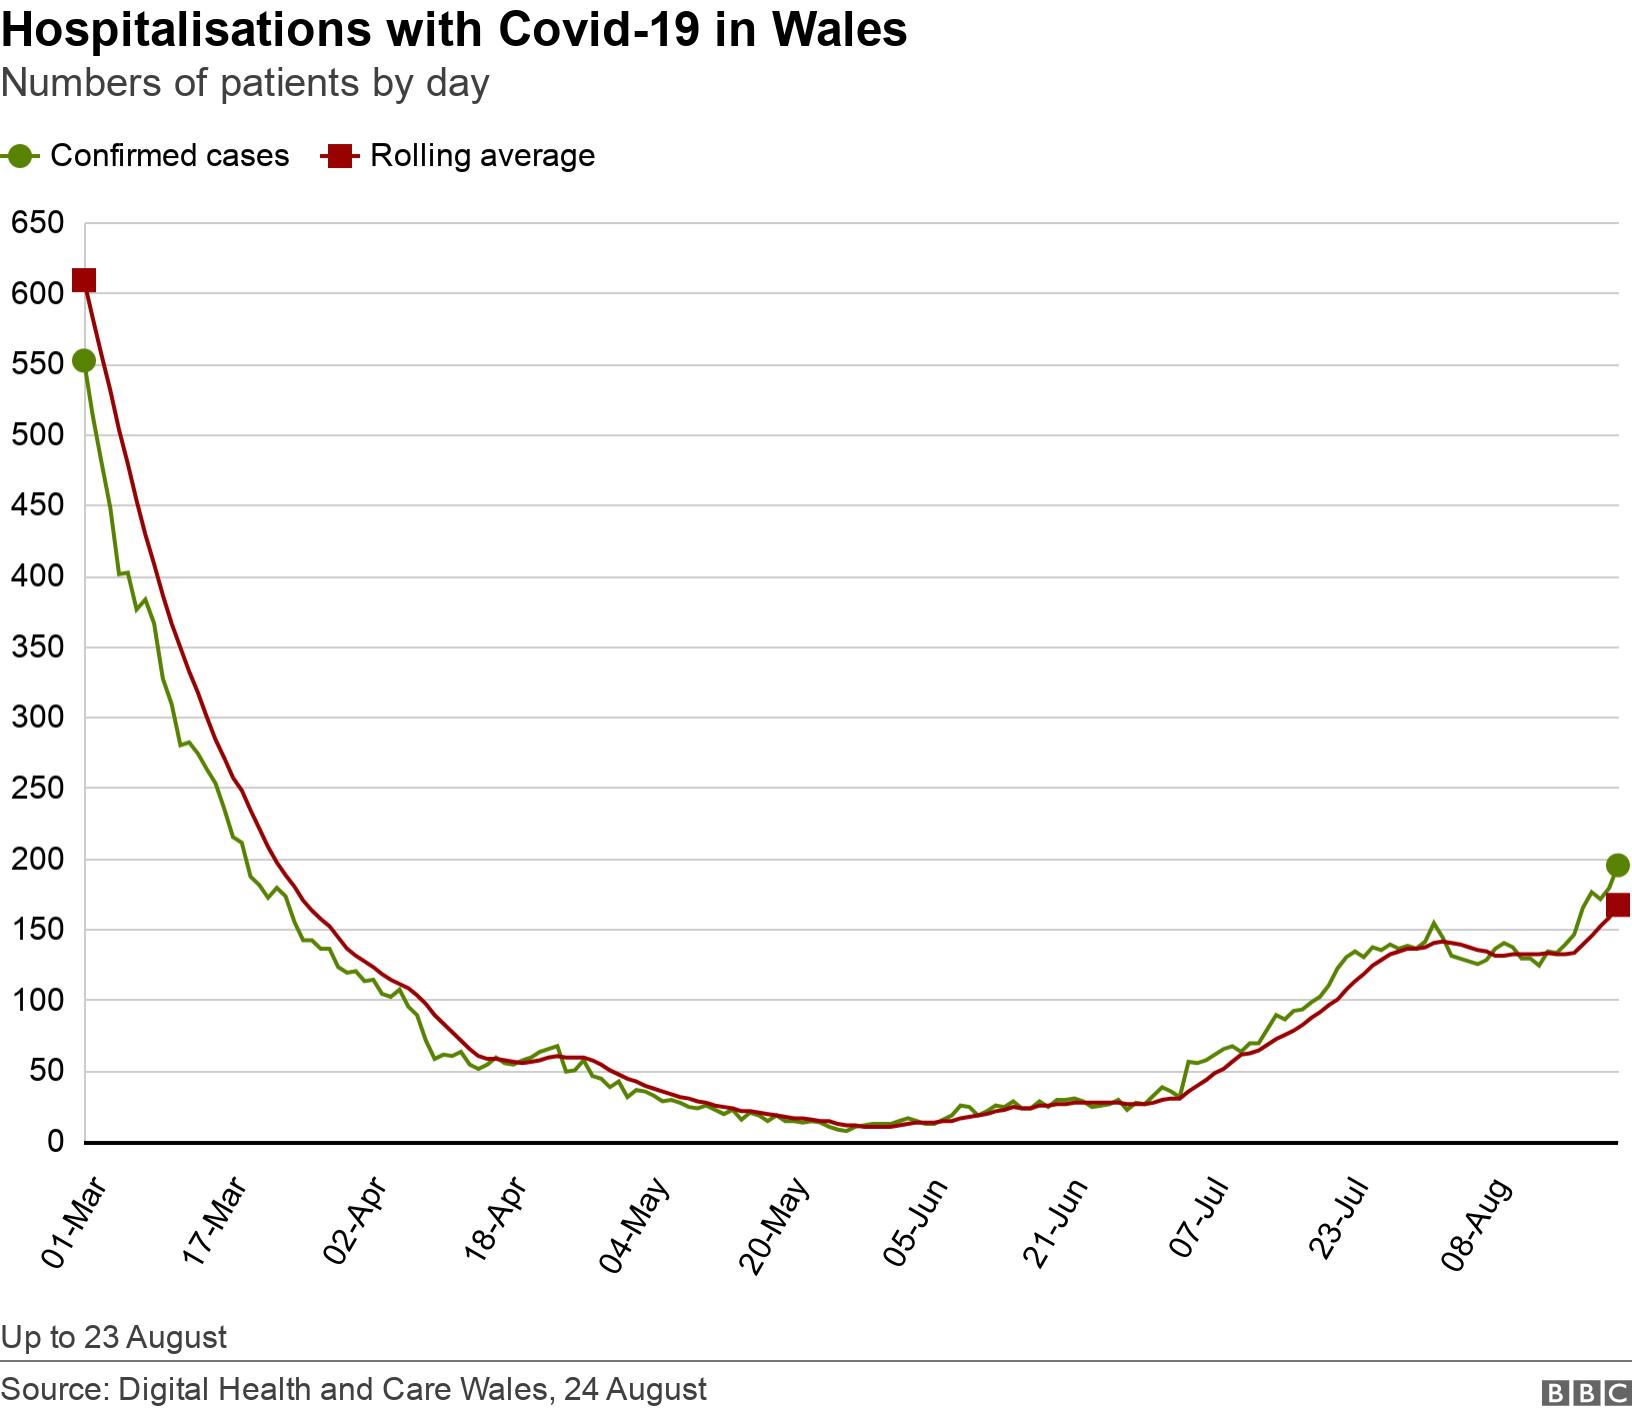 Hospitalisations with Covid-19 in Wales. Numbers of patients by day.  Up to 23 August.